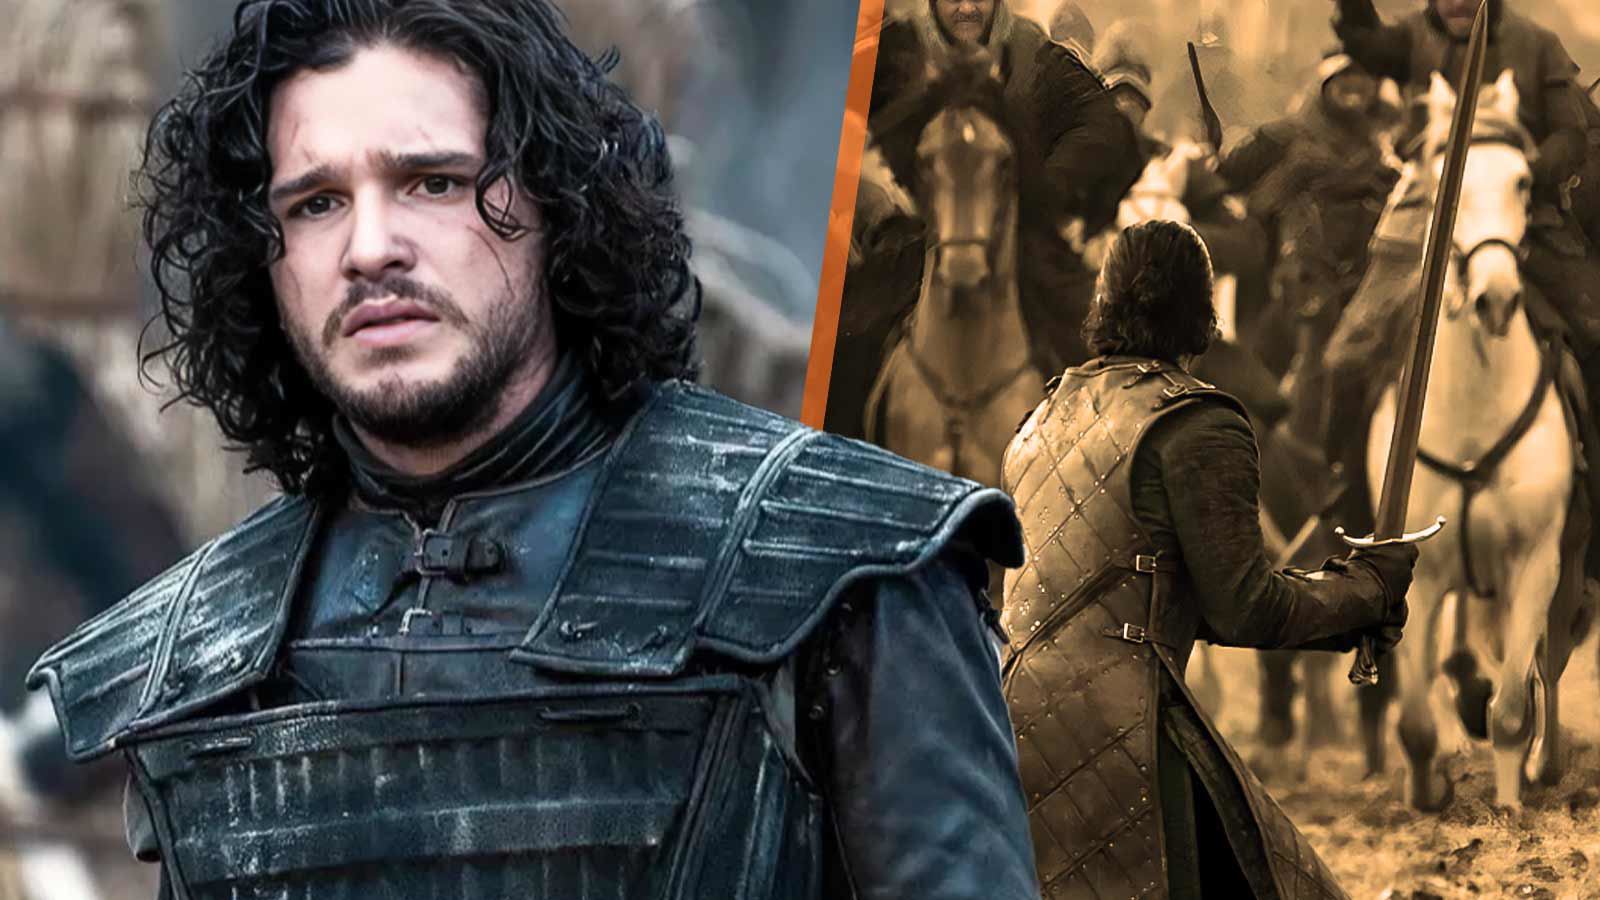 ‘Battle of the Bastards’ in ‘Game of Thrones’ Put Kit Harington Through an Excruciating Ordeal Which Almost Mirrored His Onscreen Agony